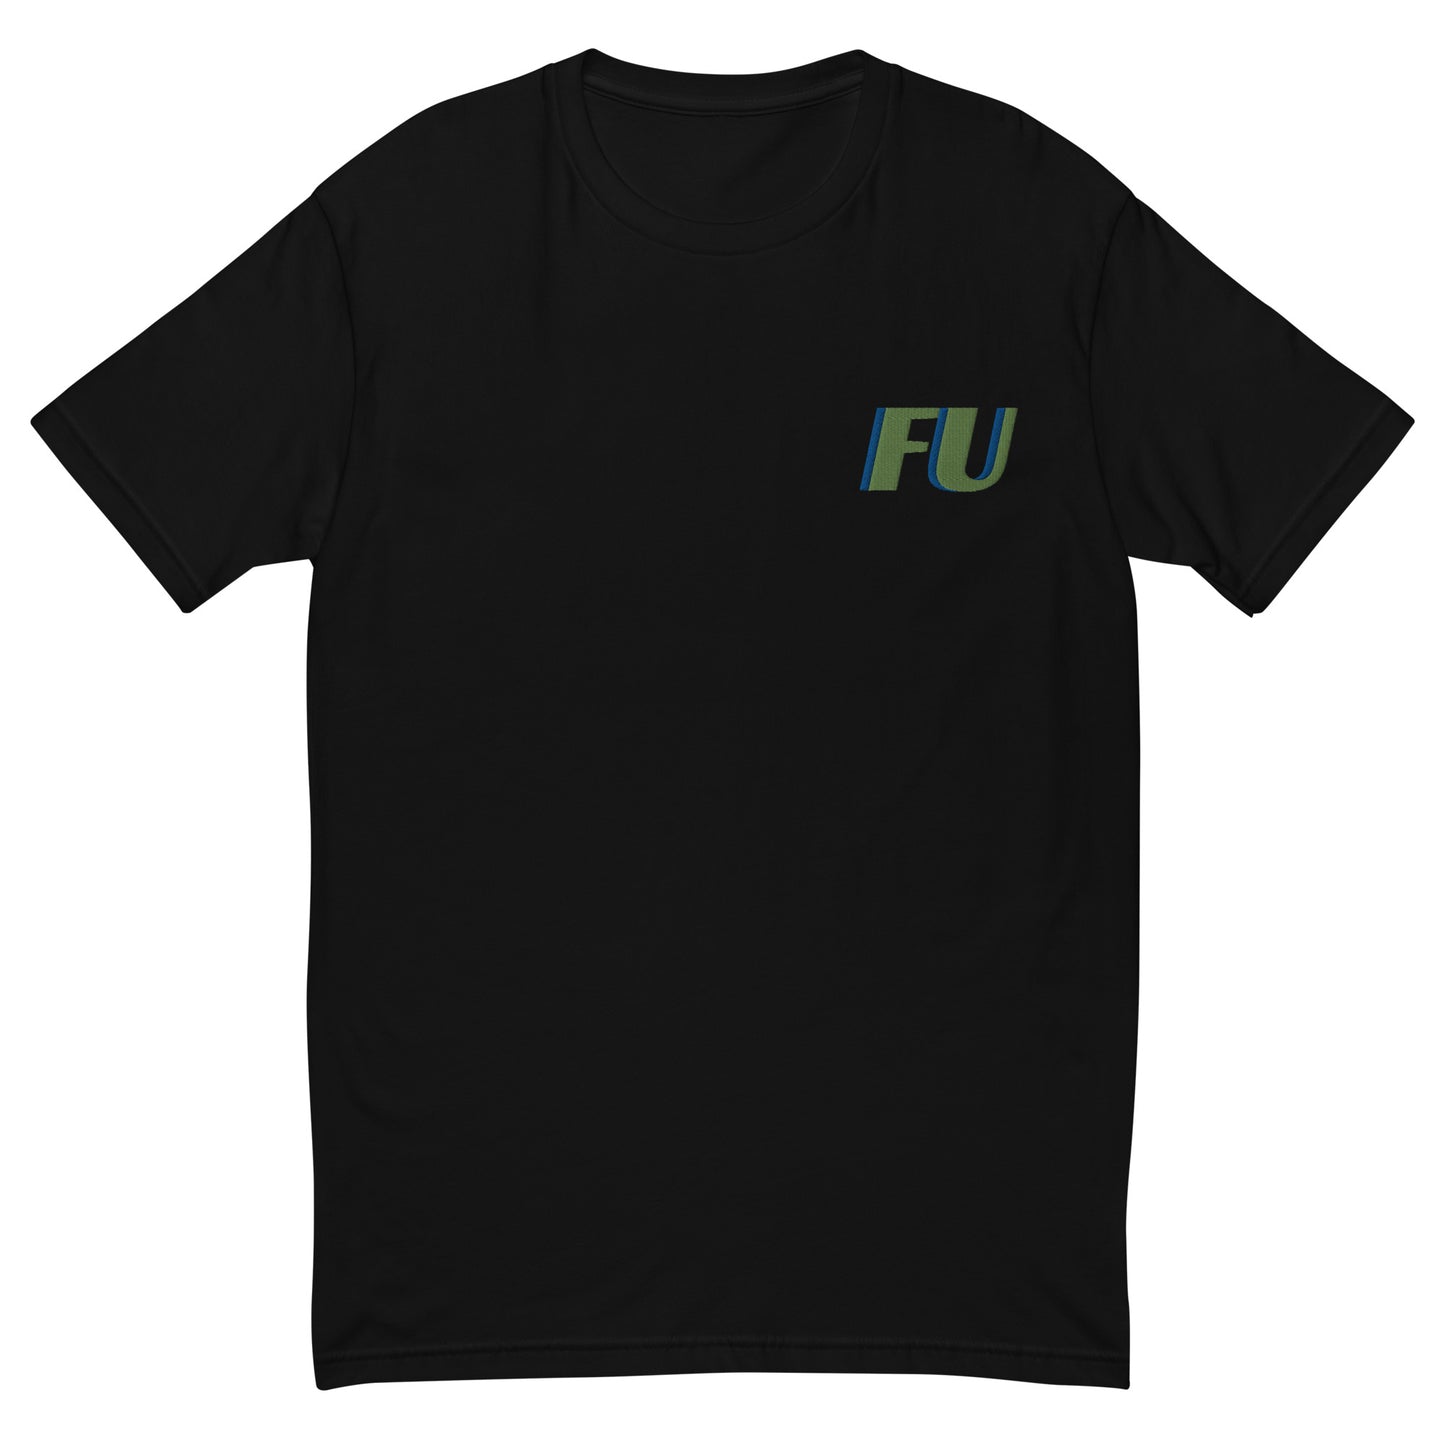 FU Fitted T